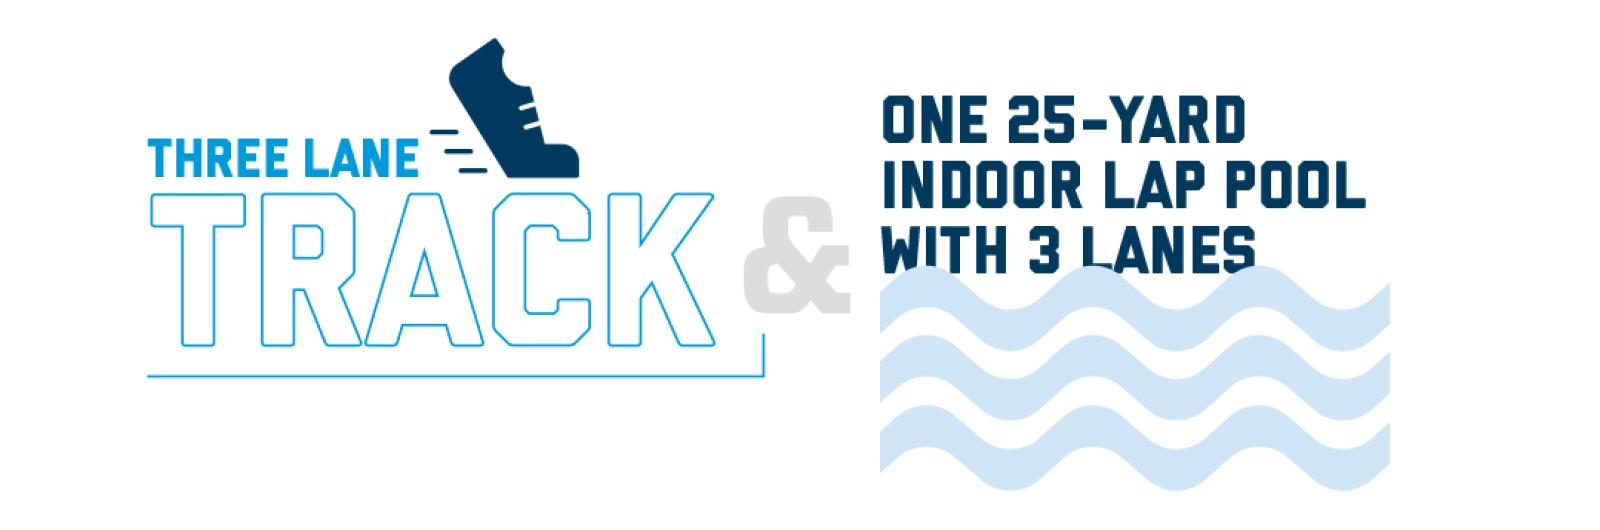 3 lane track | one 25 yard indoor lap pool with 3 lanes